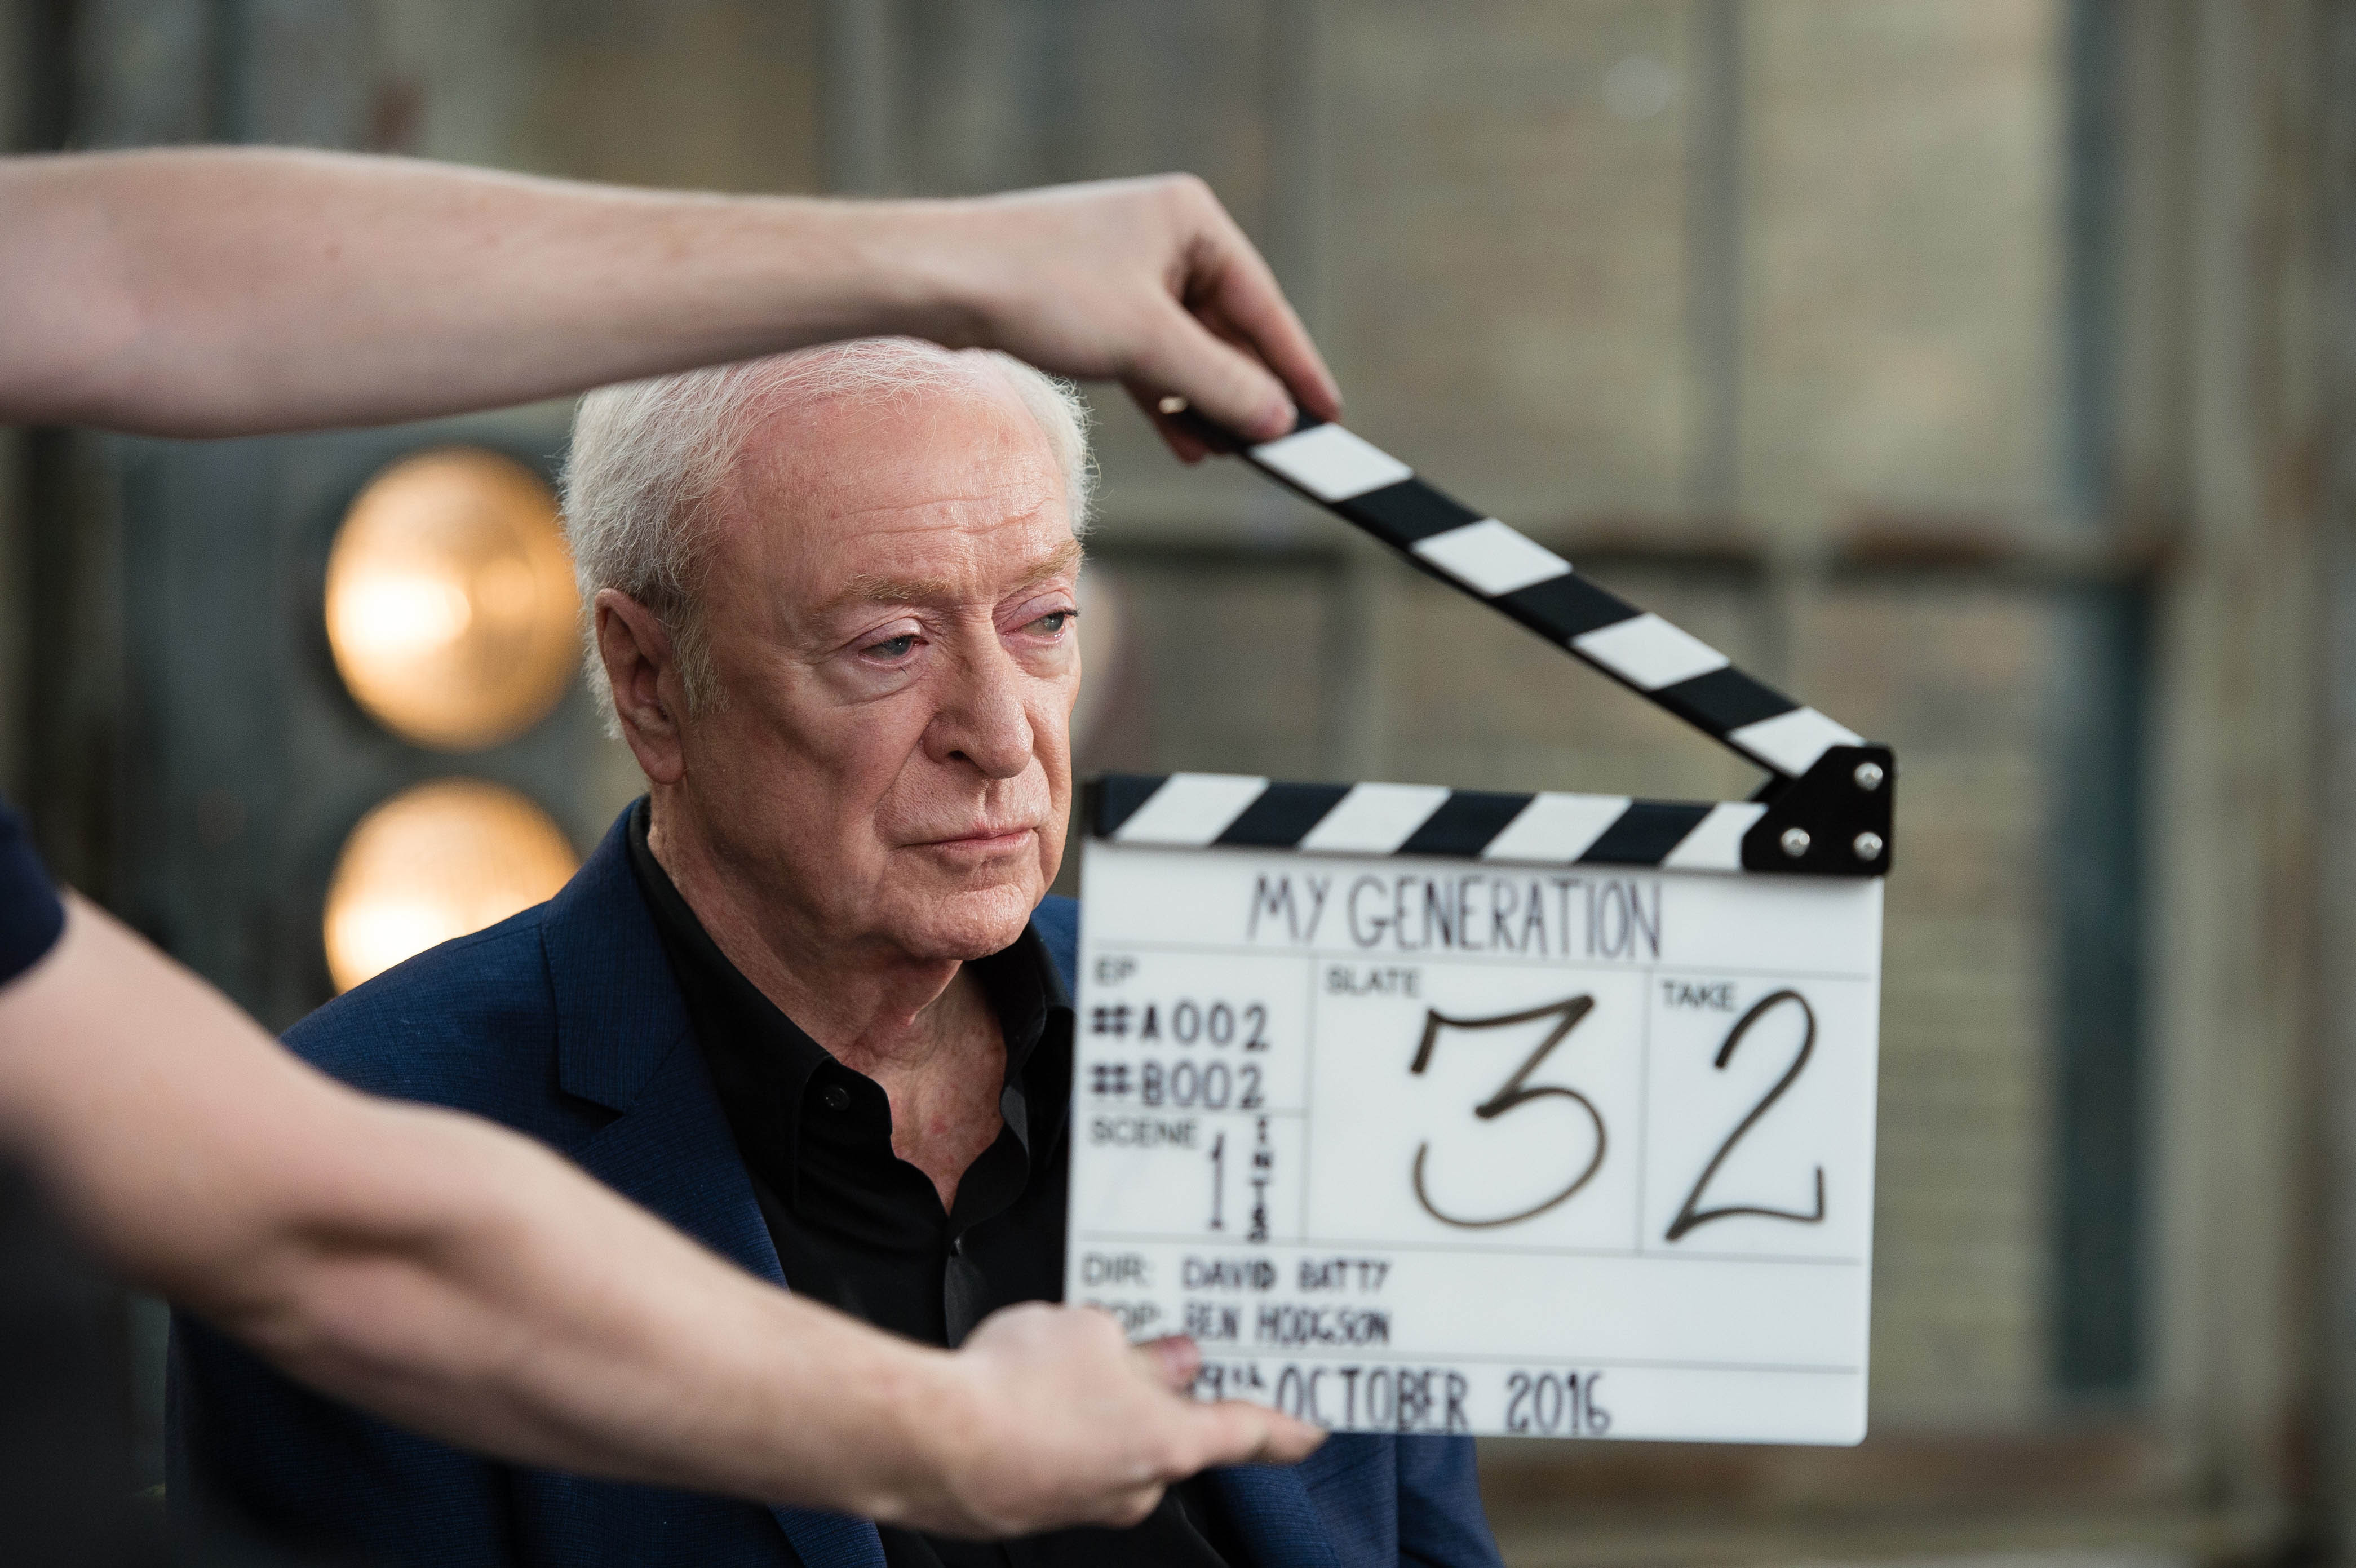 Michael Caine My Generation documentaire